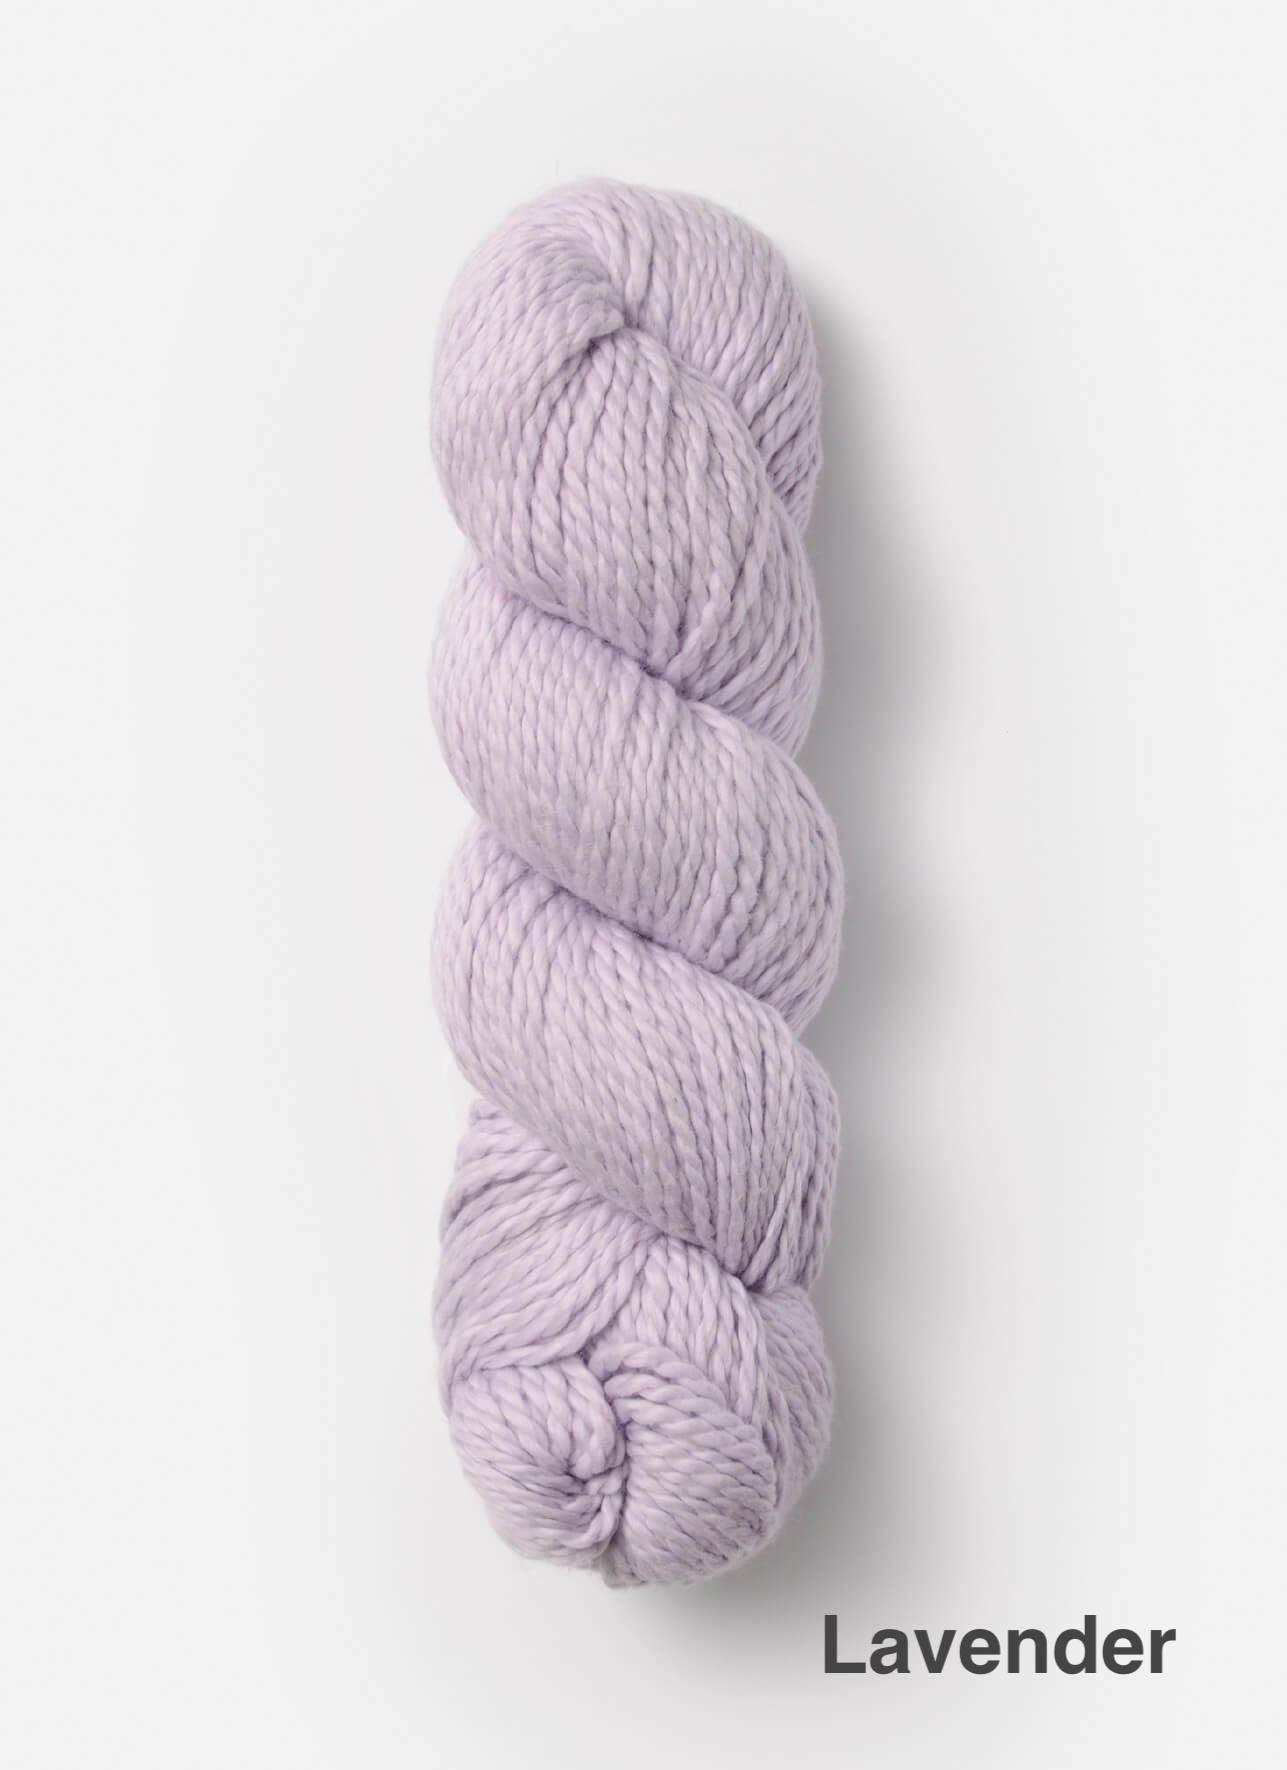 Blue Sky Fibers Organic Cotton Worsted Lavender Colorway